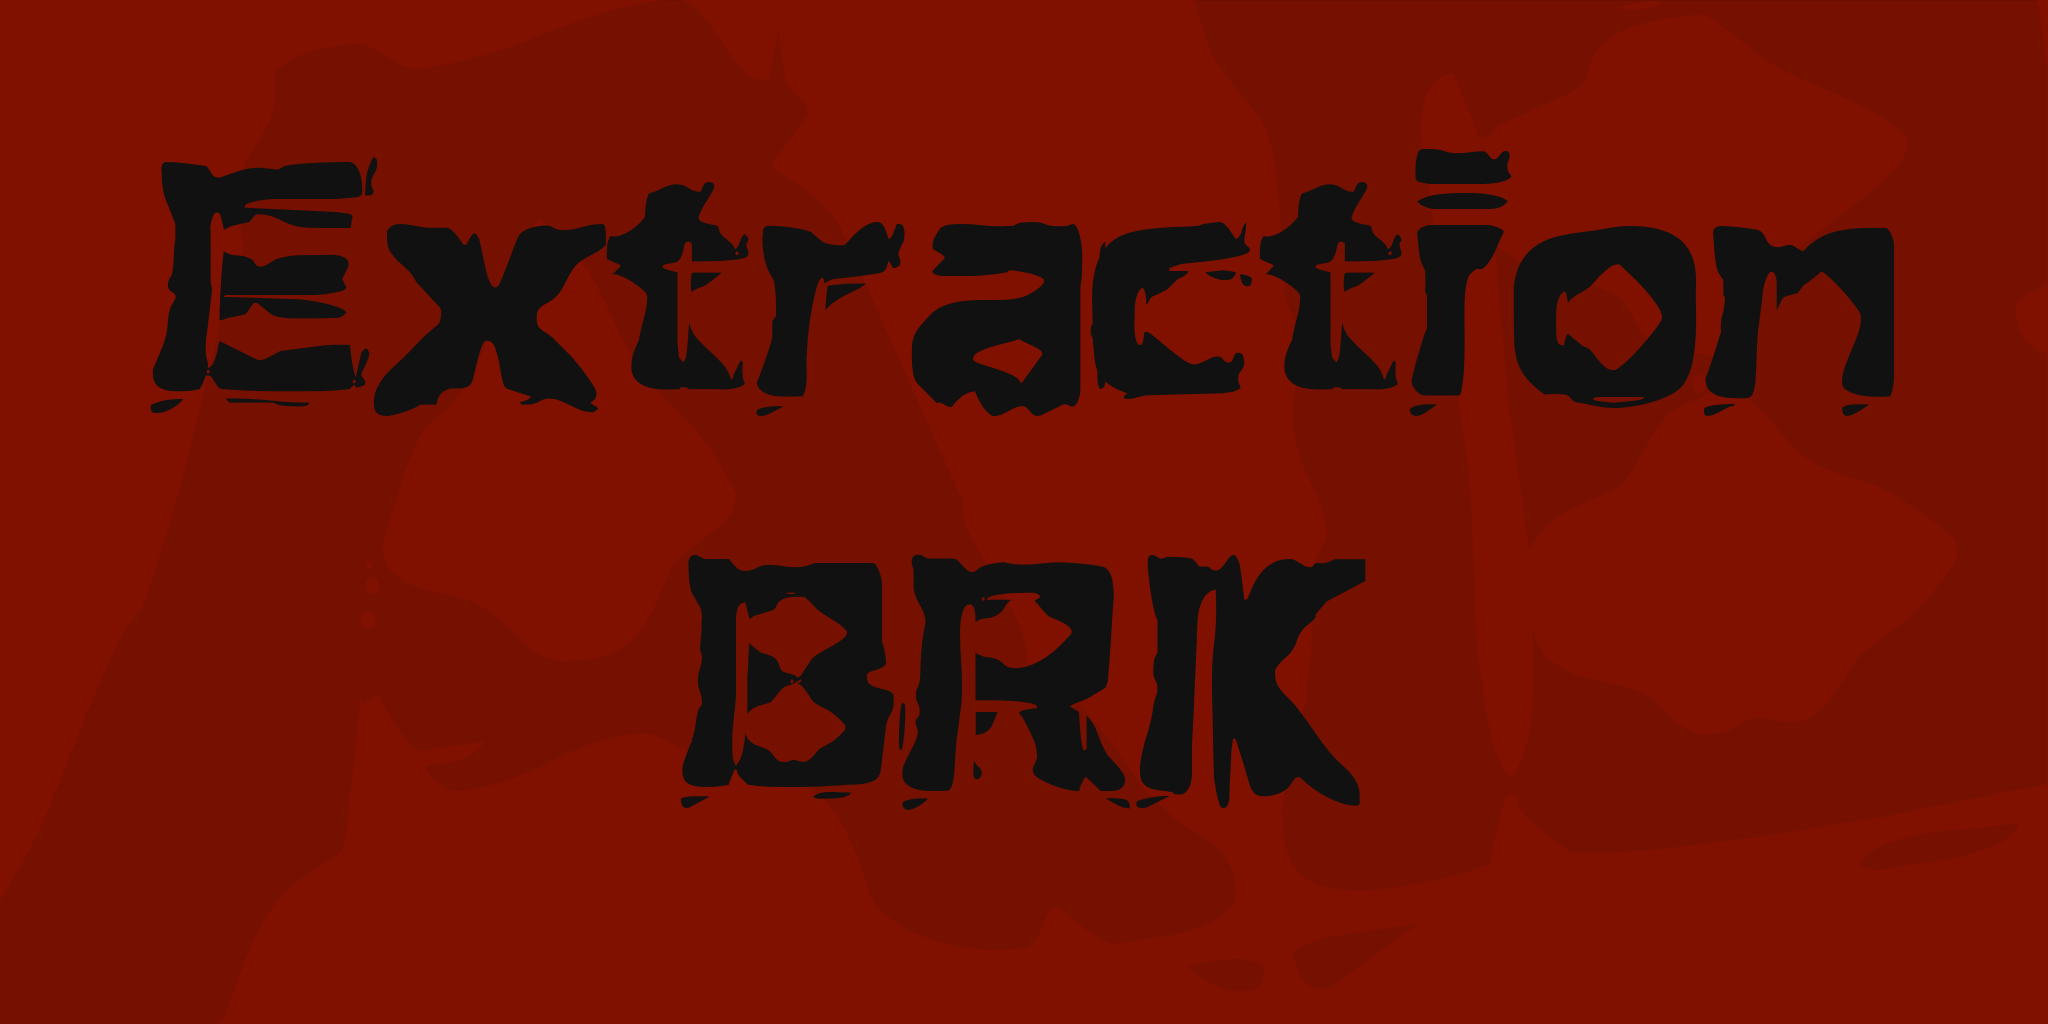 Extraction Brk